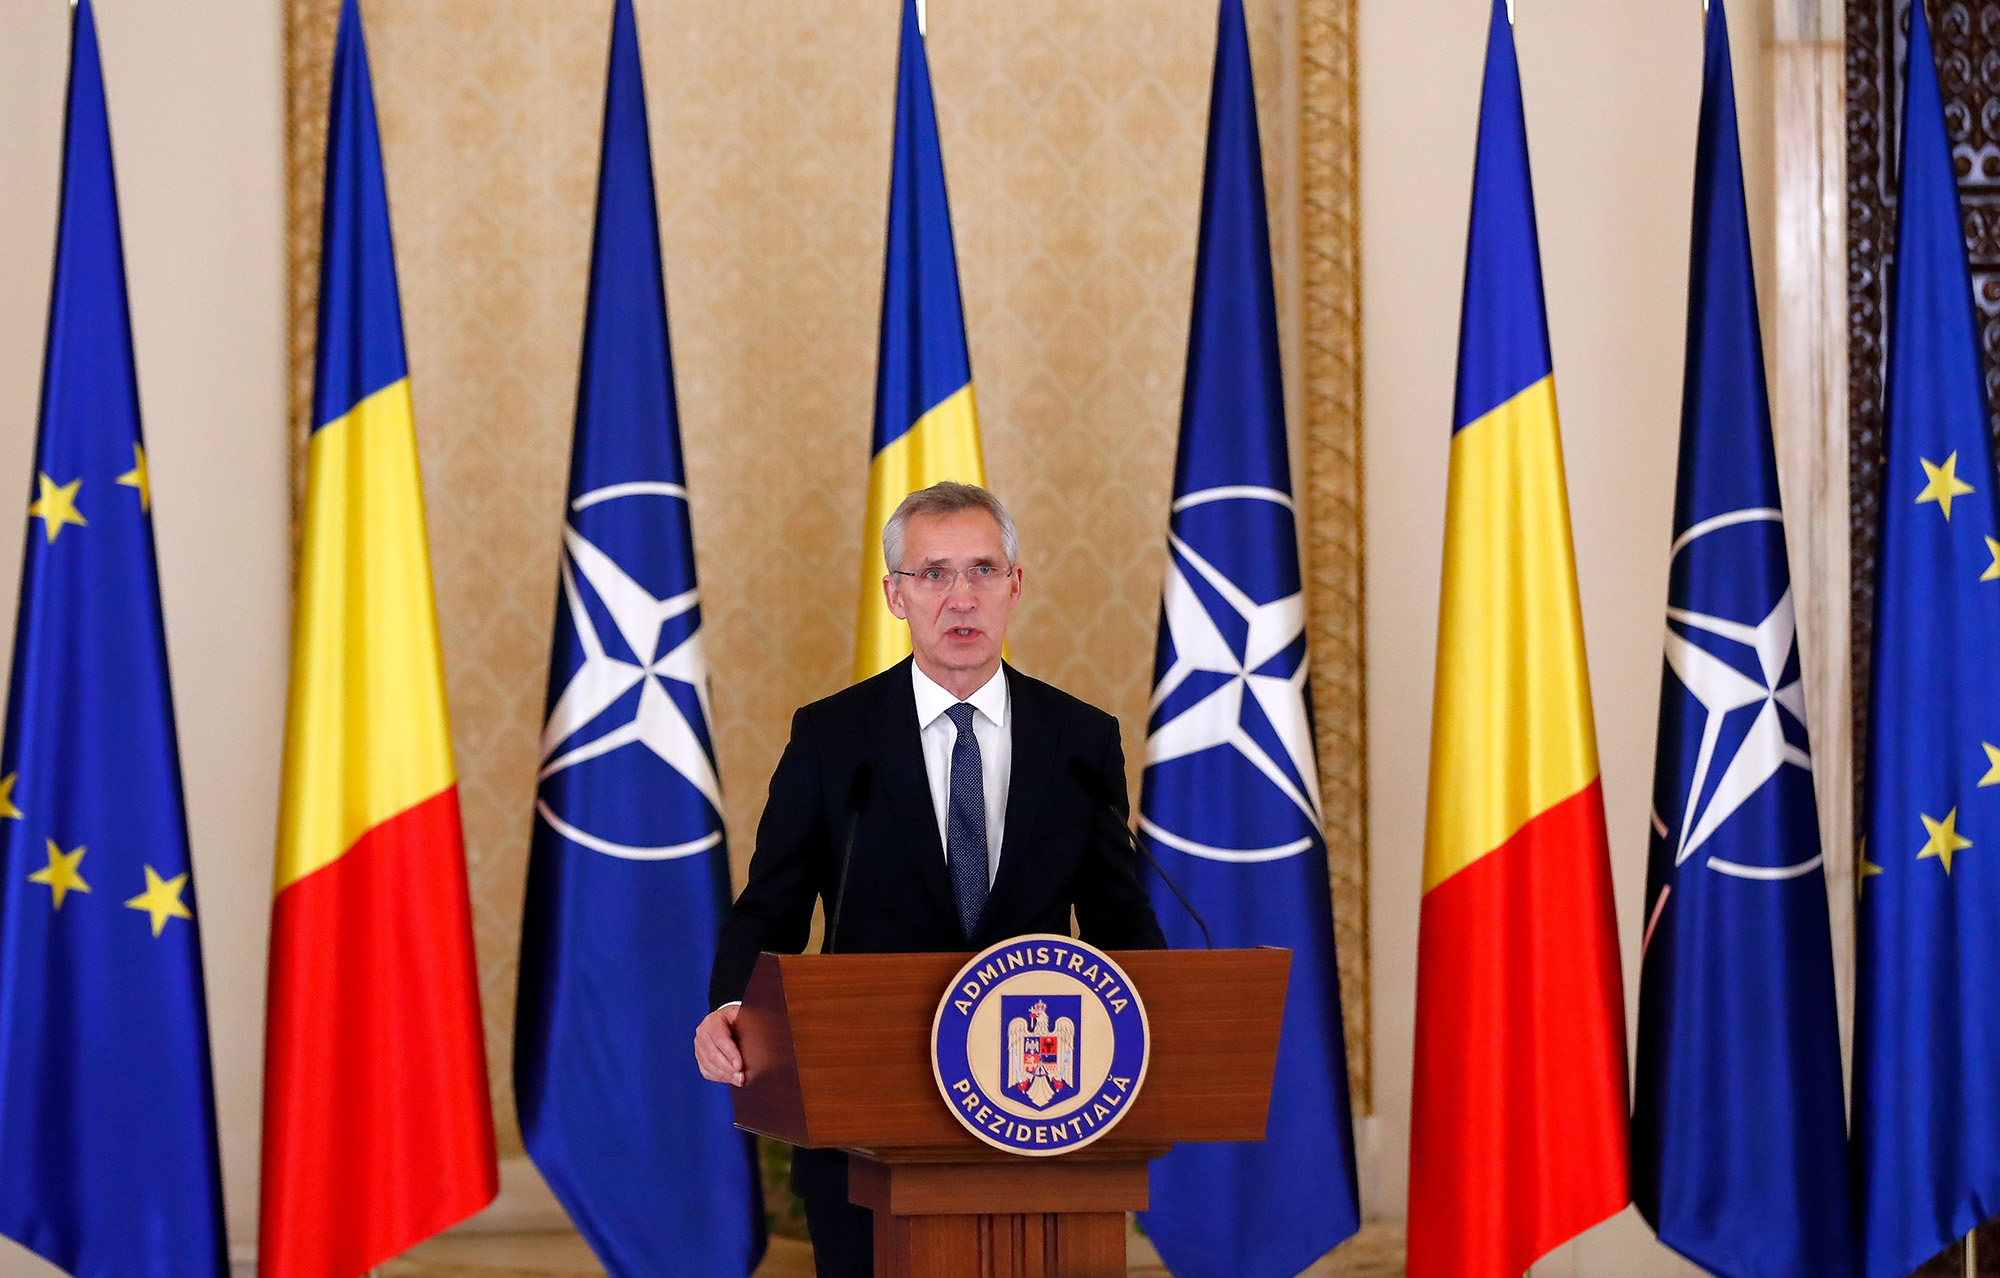 NATO Secretary General Jens Stoltenberg speaks at a press conference at the end of a meeting with Romanian President Klaus Iohannis at Cotroceni Presidential Palace in Bucharest, Romania, on November 28.